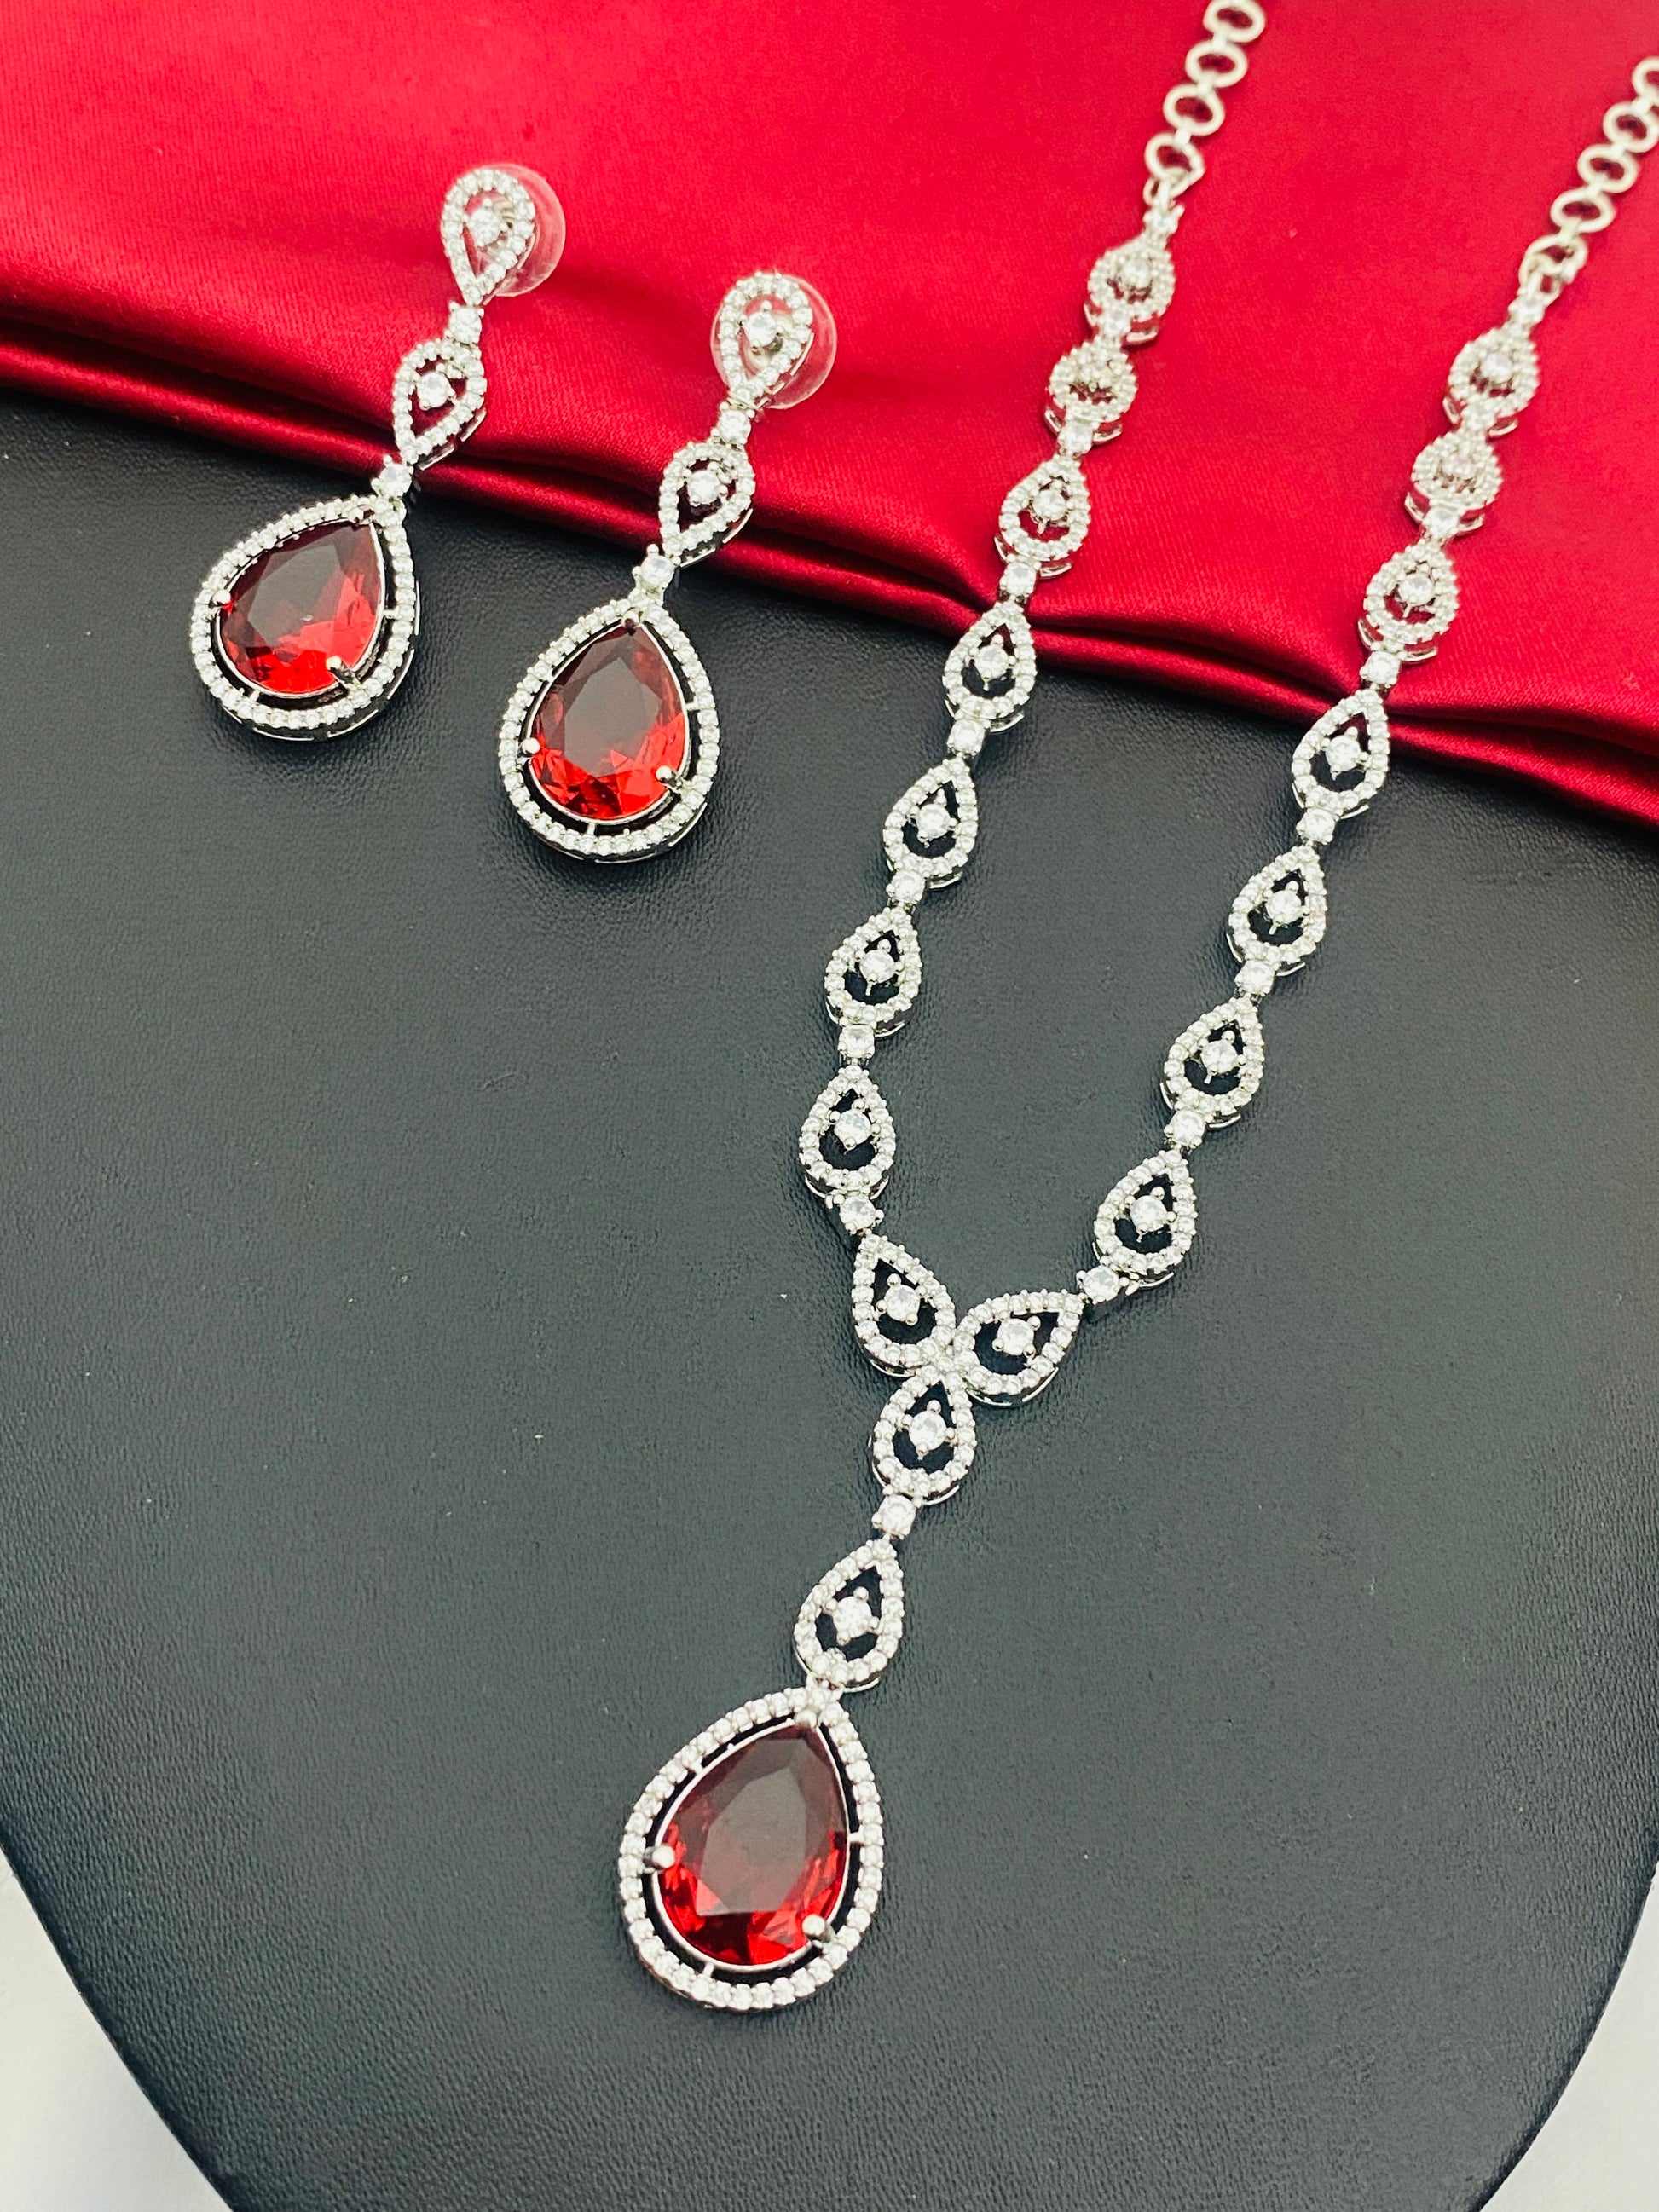 Appealing High Quality American Diamond Necklace With Earring Sets